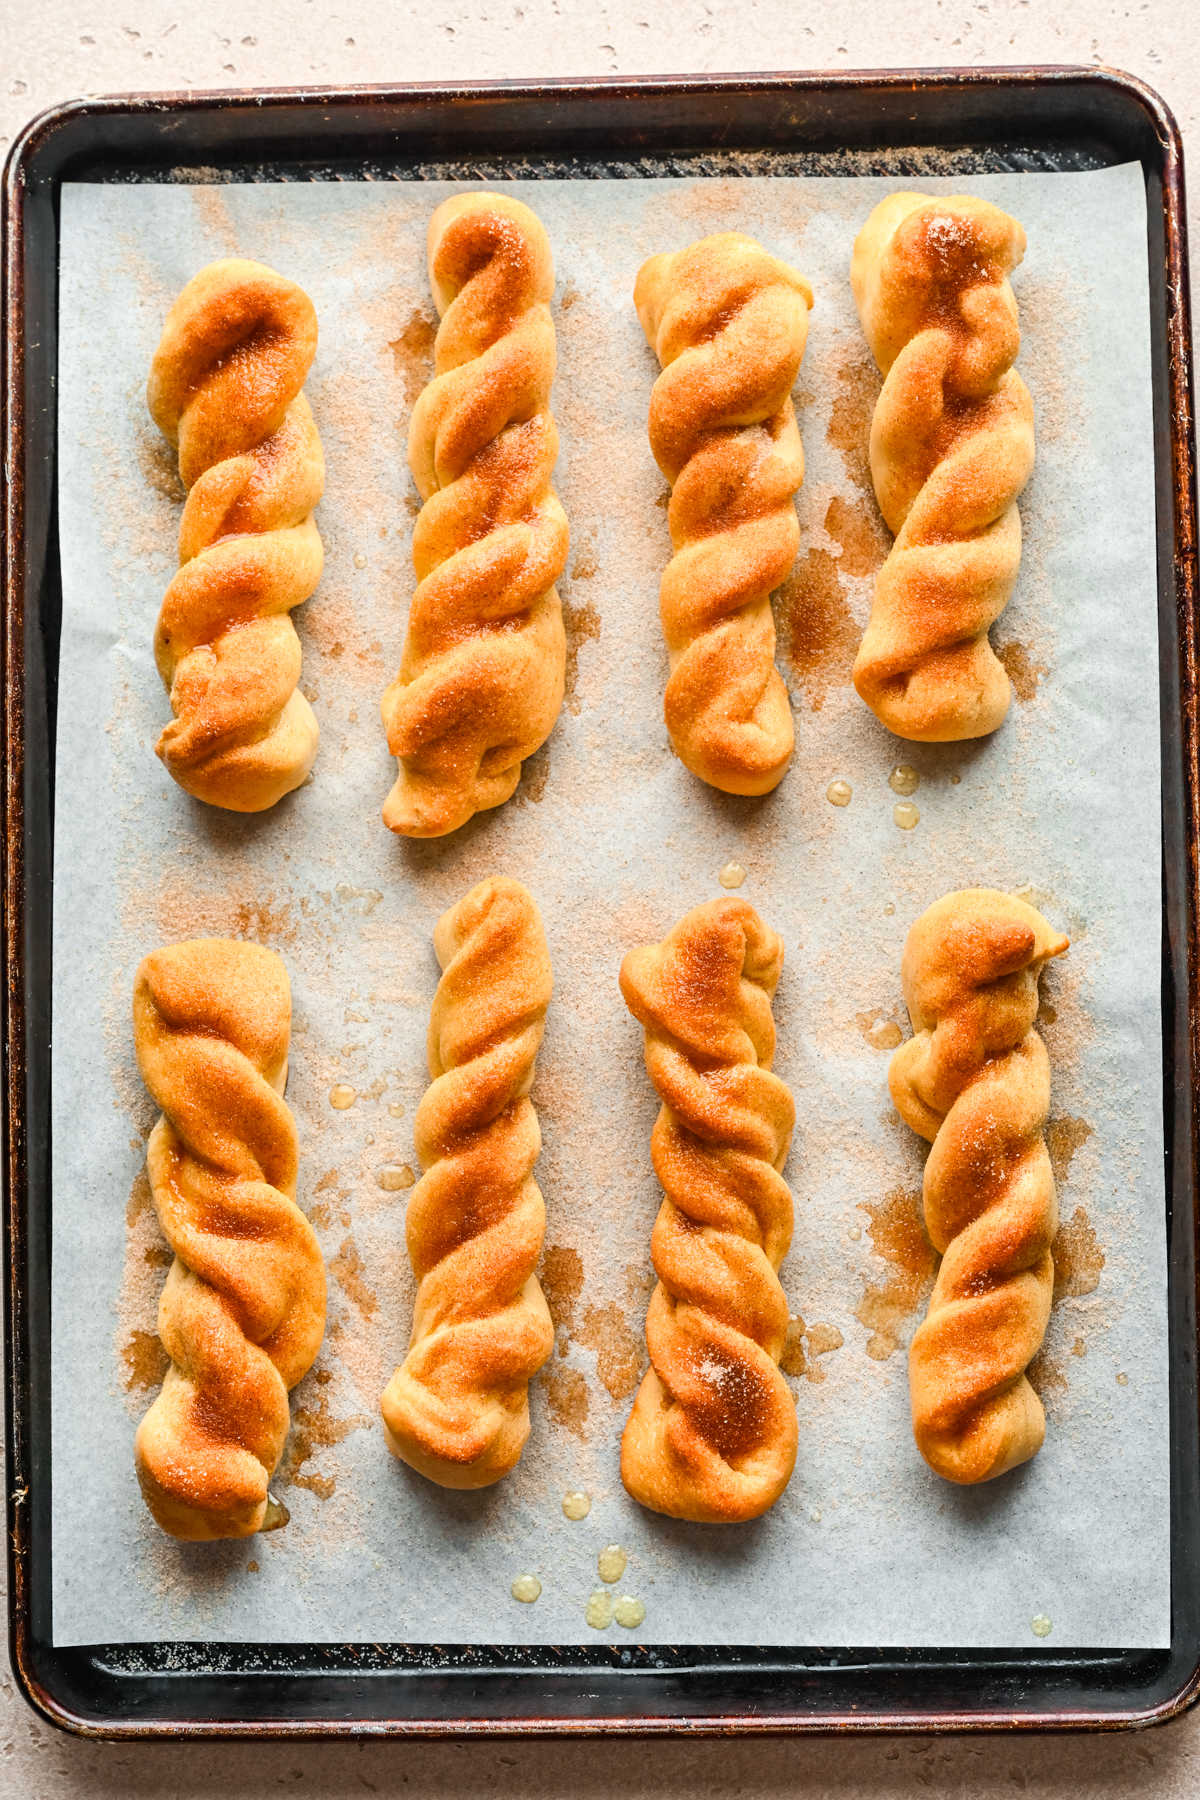 Cinnamon breadsticks on a parchment lined baking sheet.